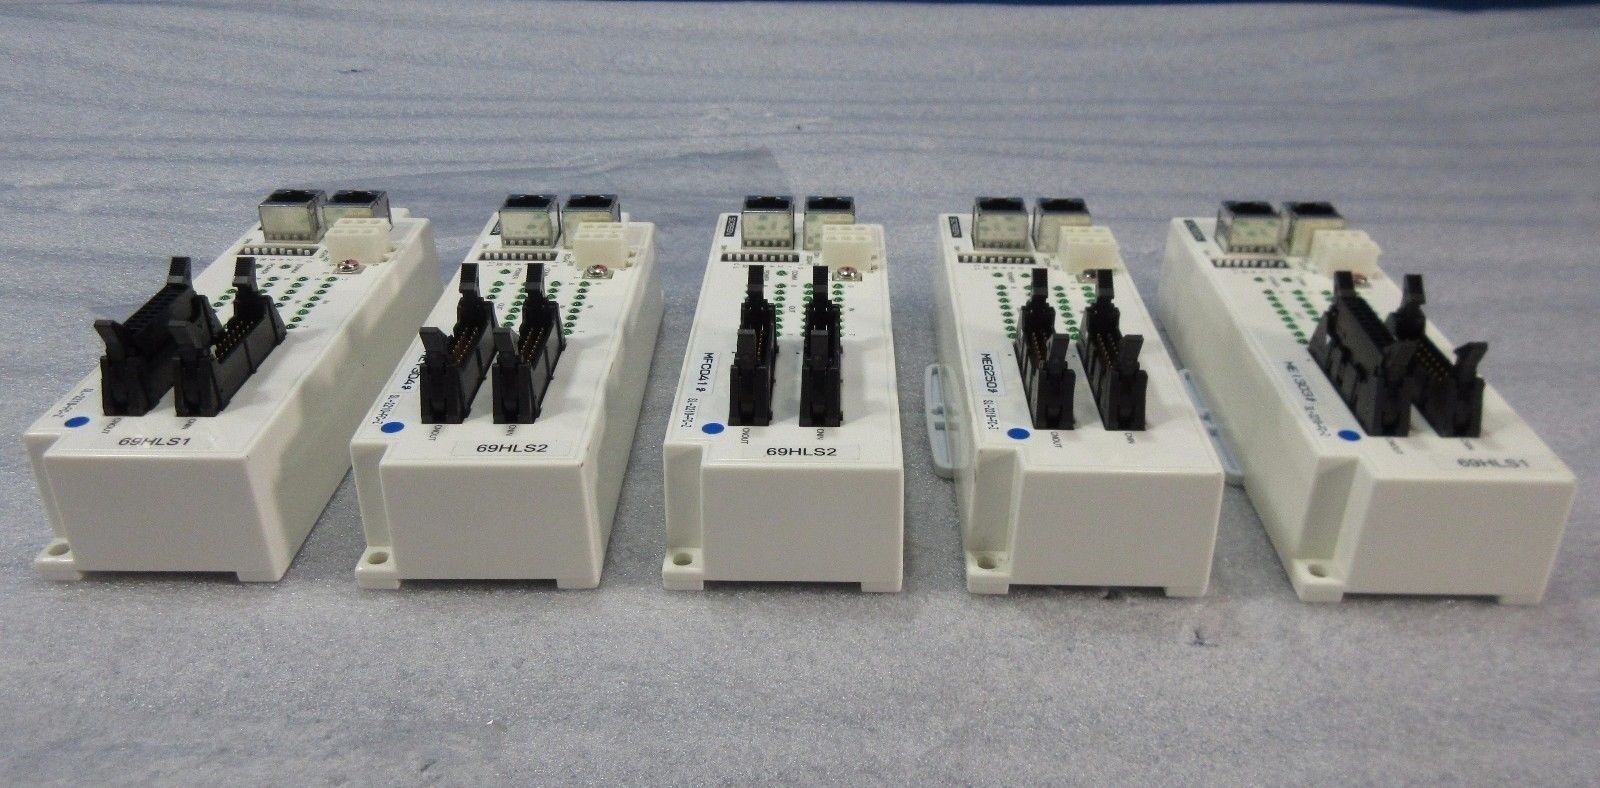 Screen SL-2210-FC-Z Network Control Lot of 5 Used Working